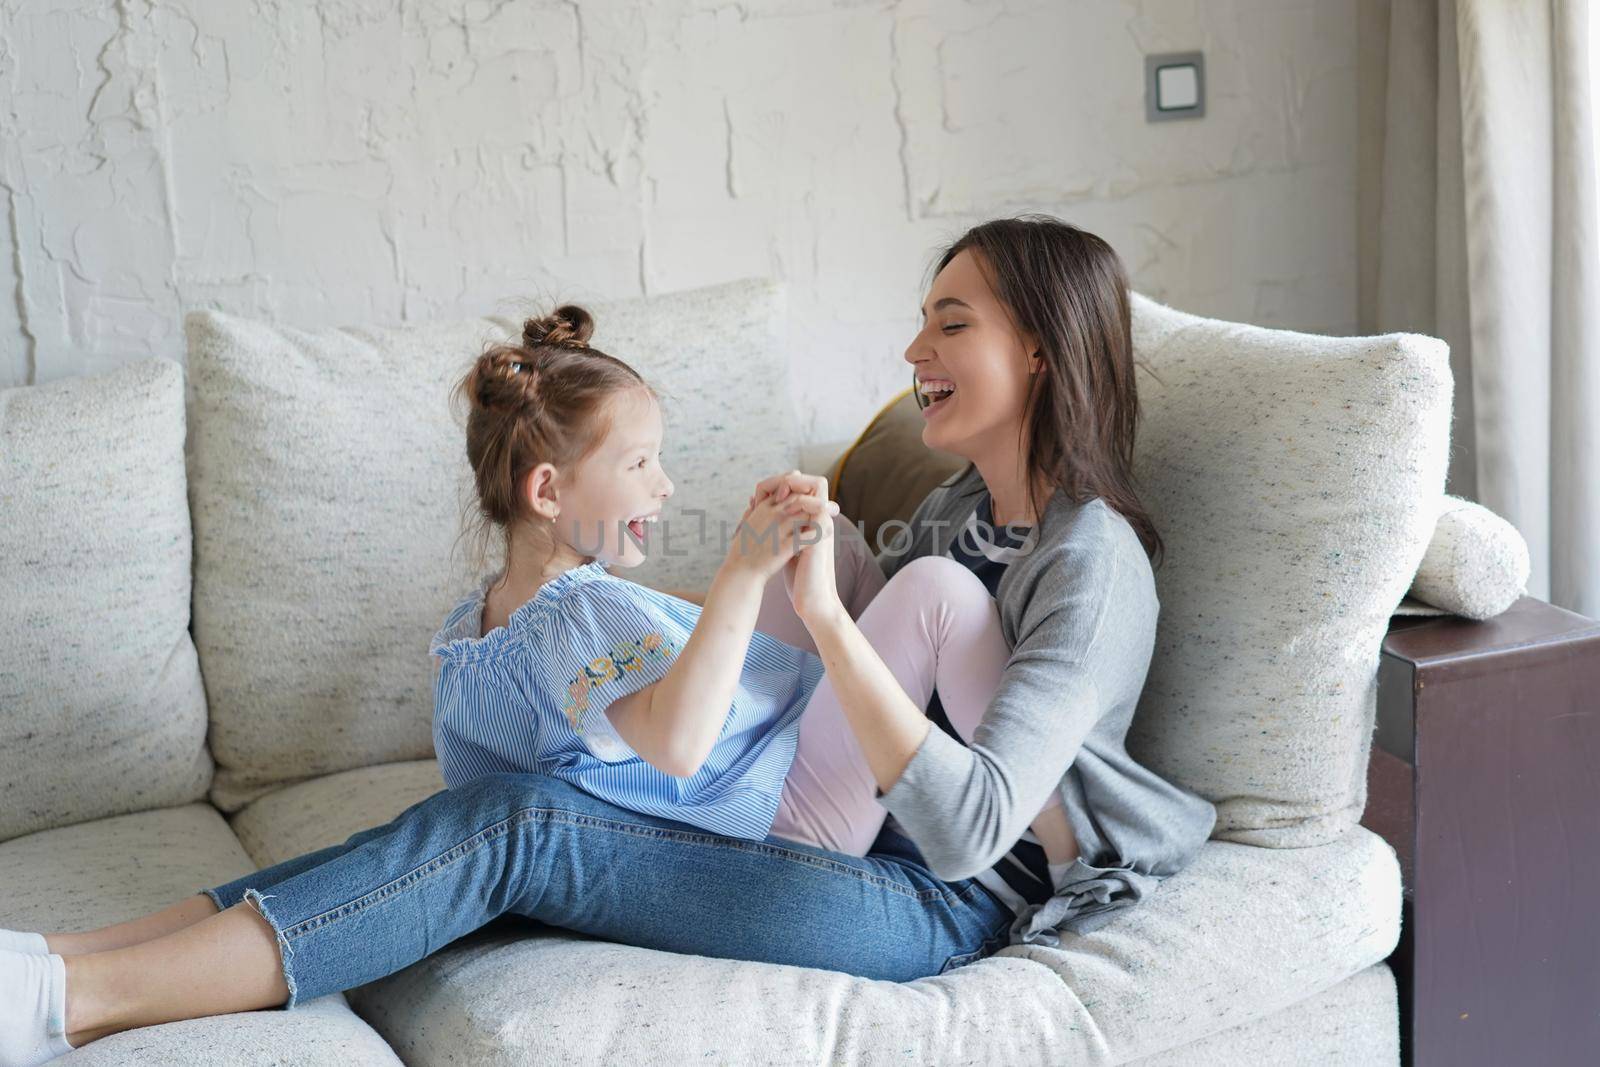 Cute little kid daughter laughing playing with mother on sofa, happy mother relaxing having fun with funny small child girl bonding enjoying leisure together in living room